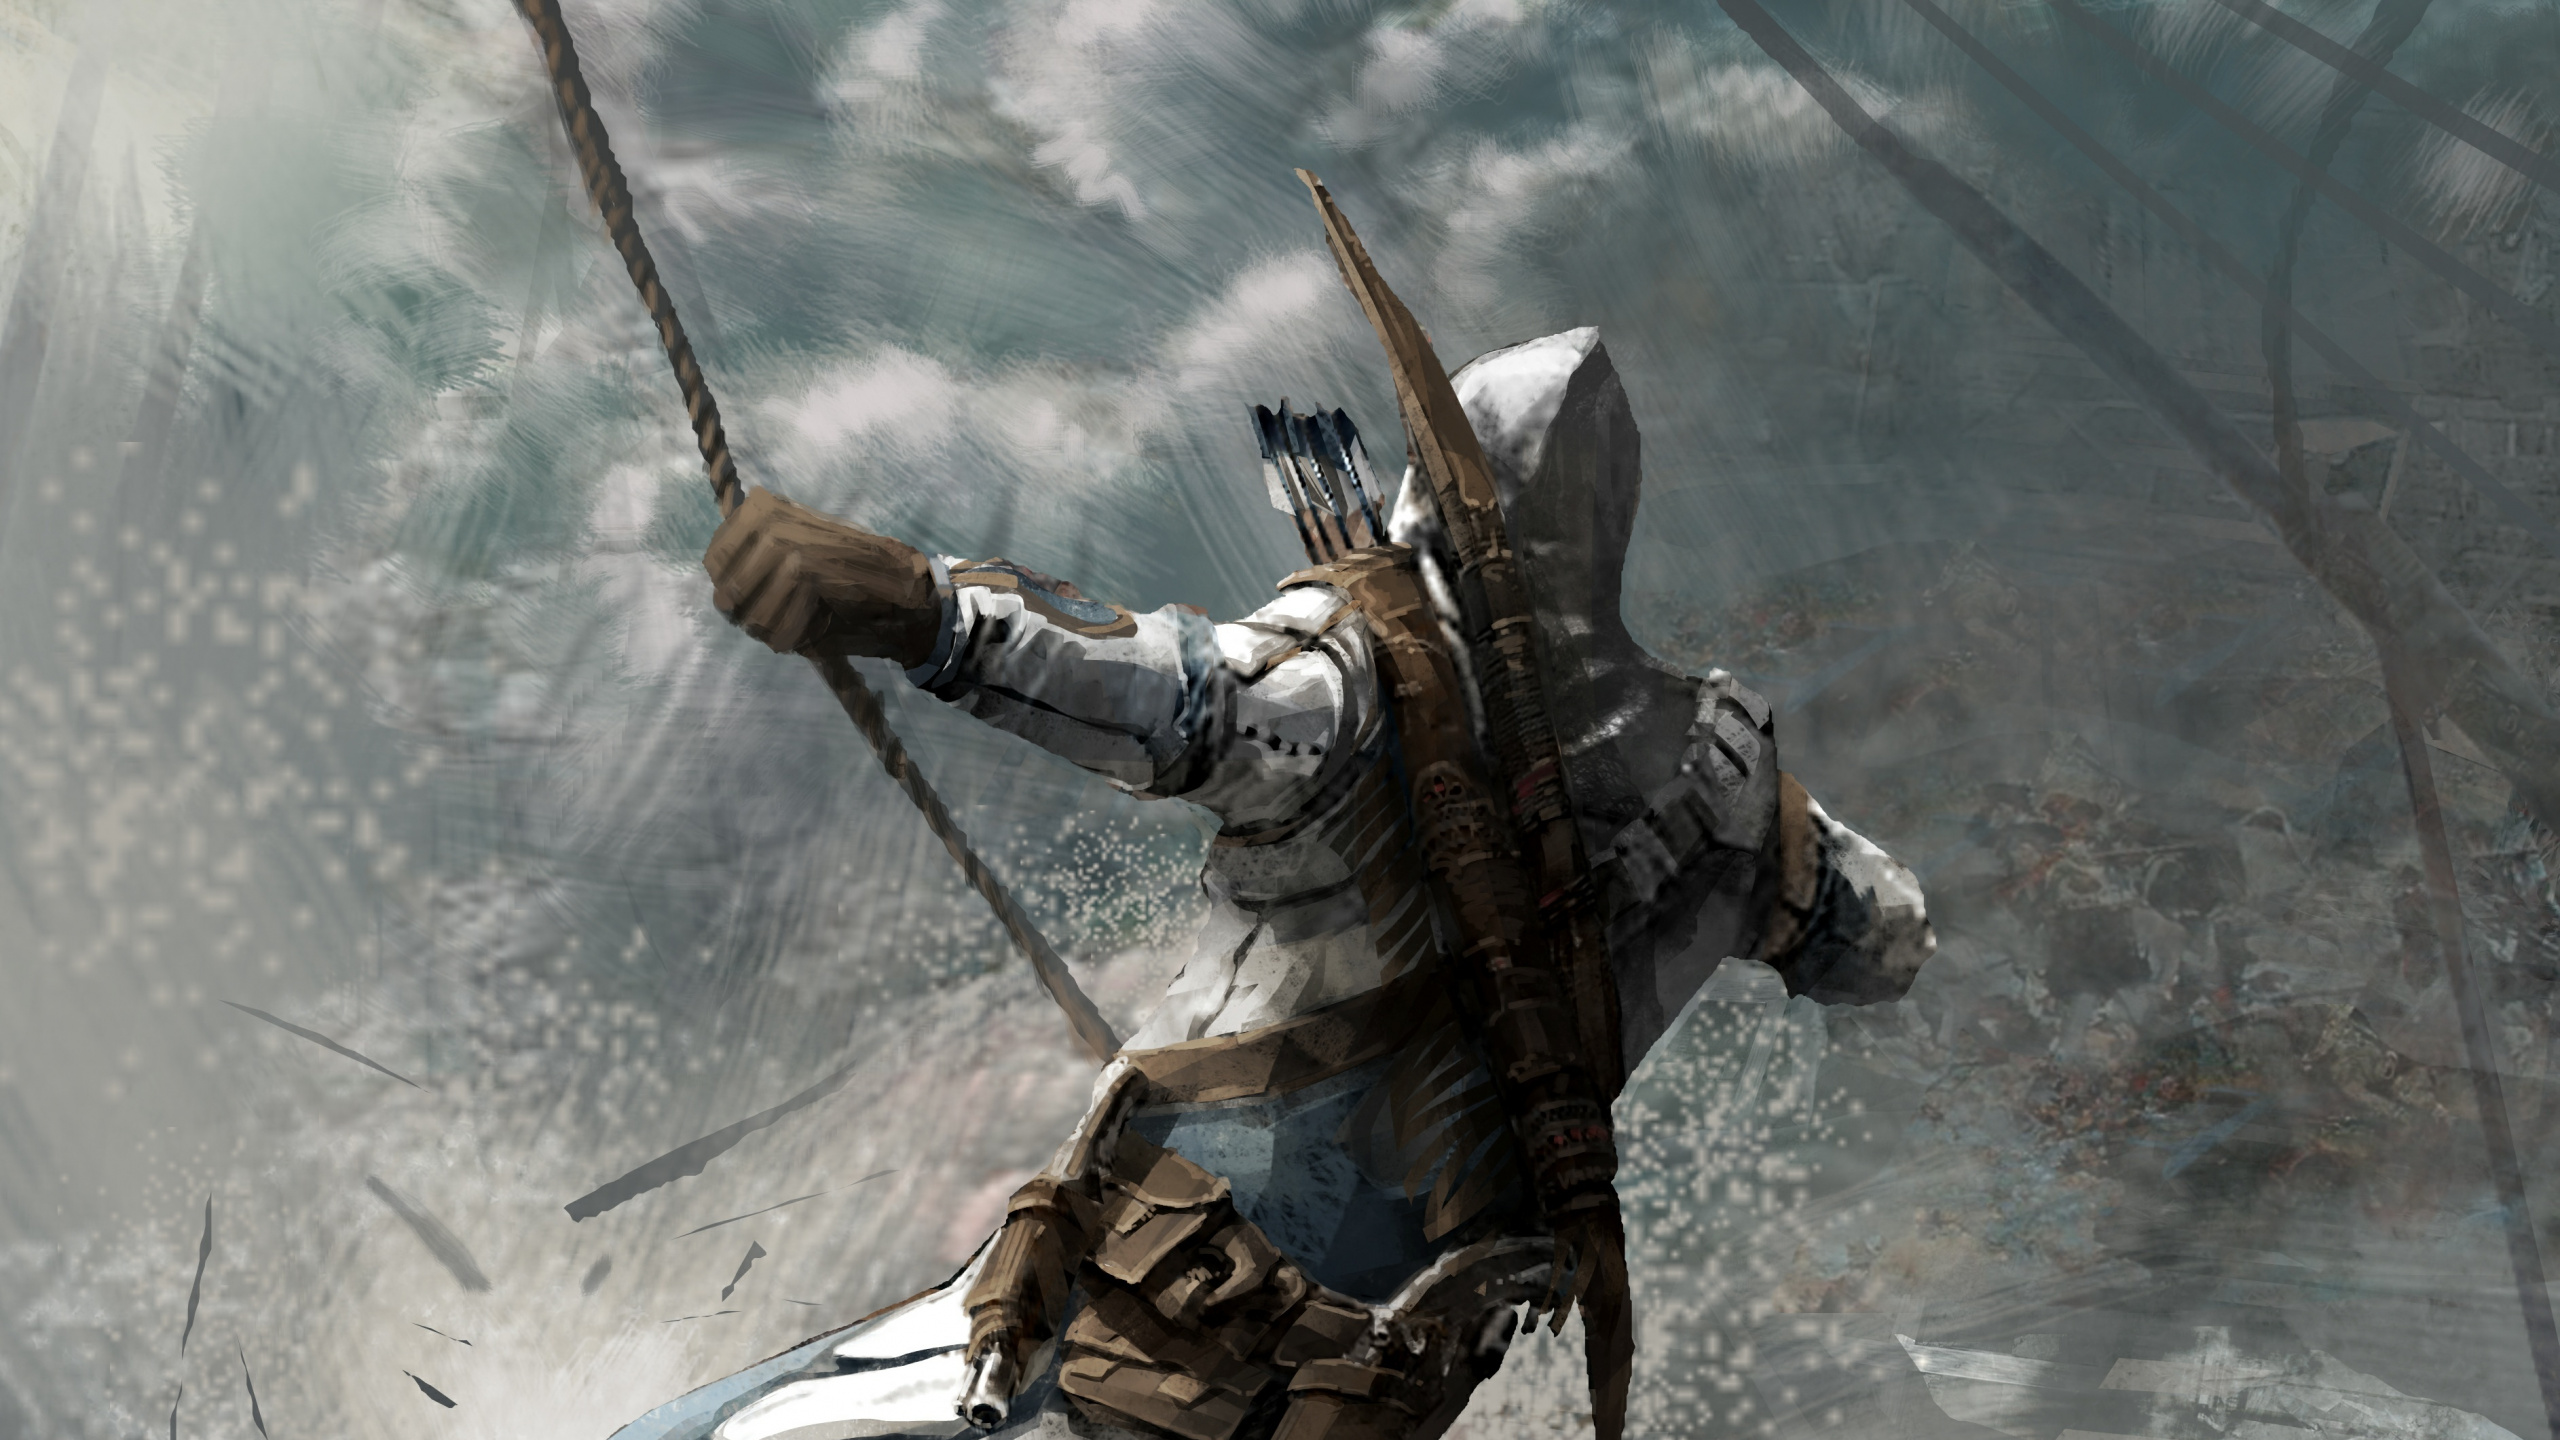 Assassins Creed III, Assassins Creed, Ezio Auditore, Connor Kenway, Ubisoft. Wallpaper in 2560x1440 Resolution